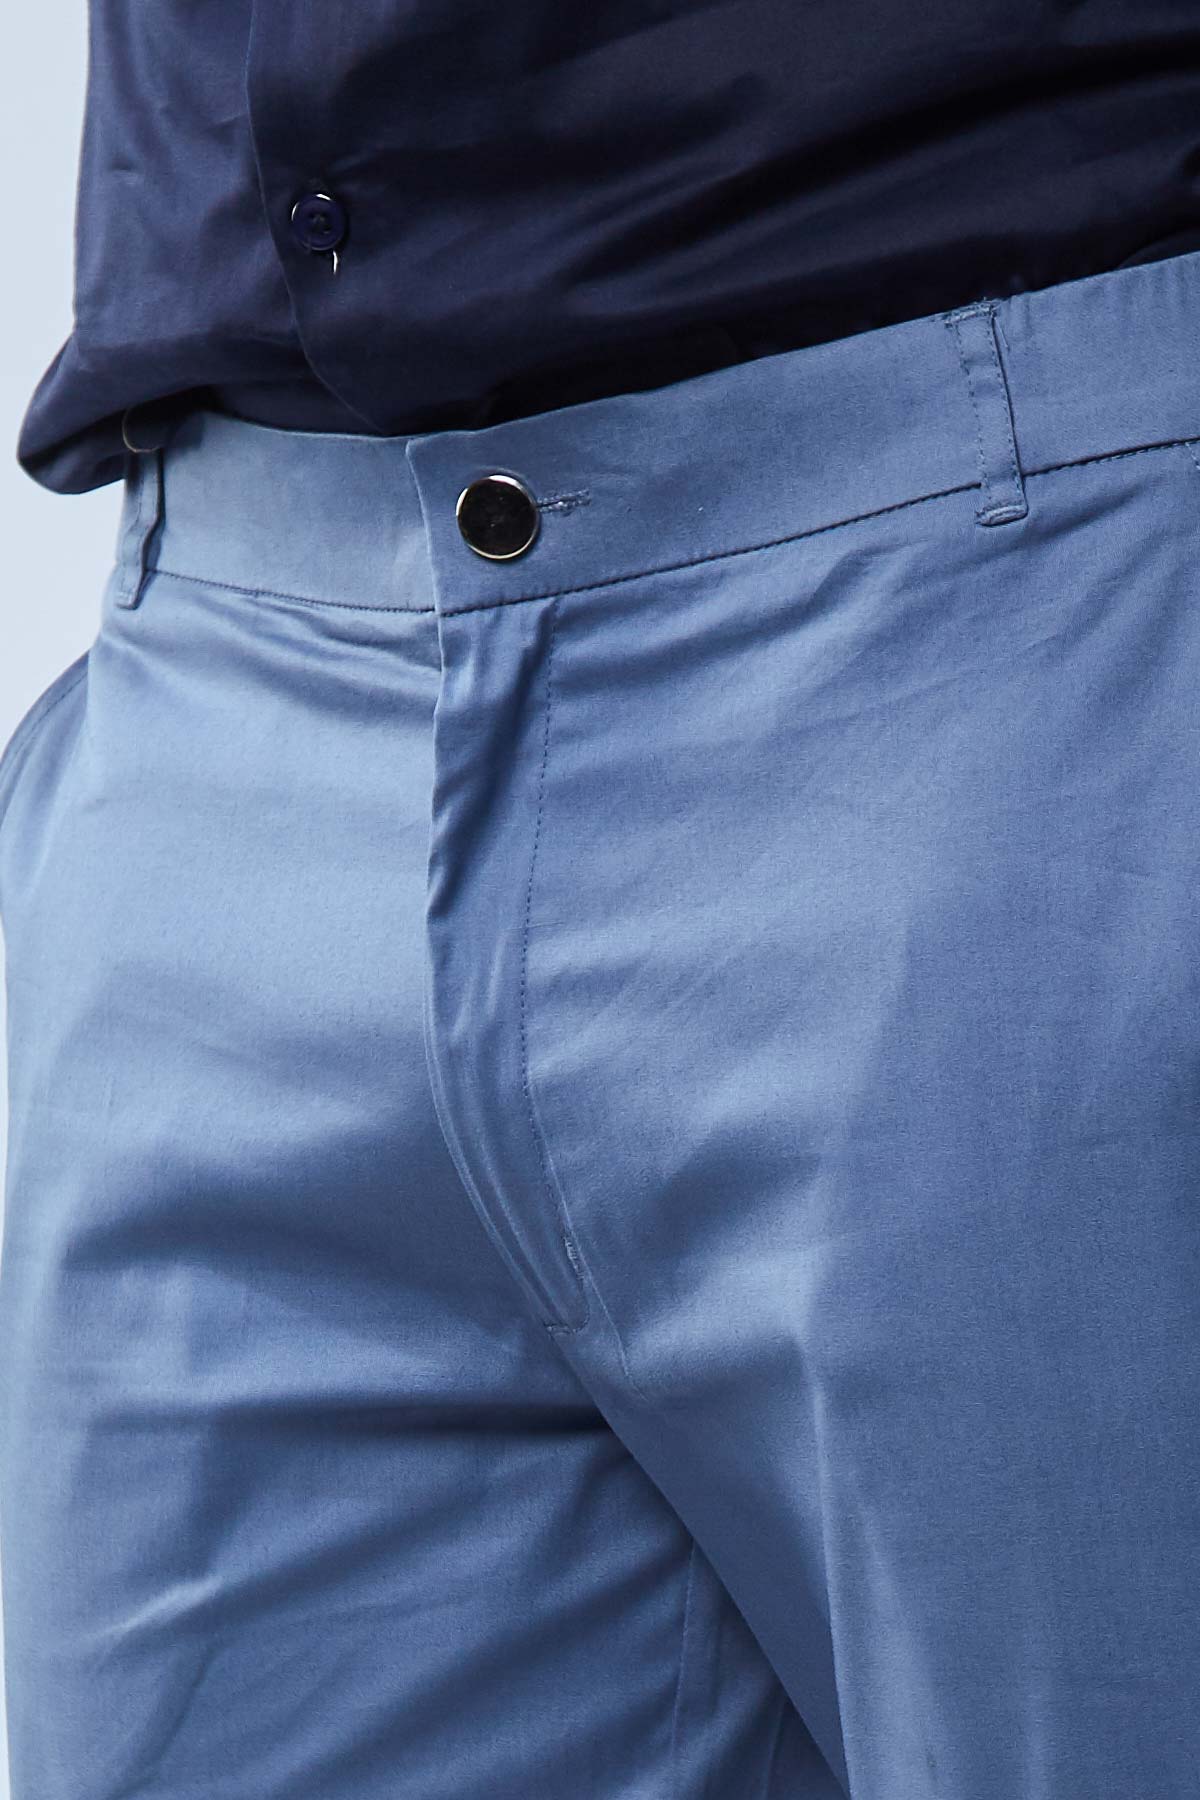 The Bluefin Pant